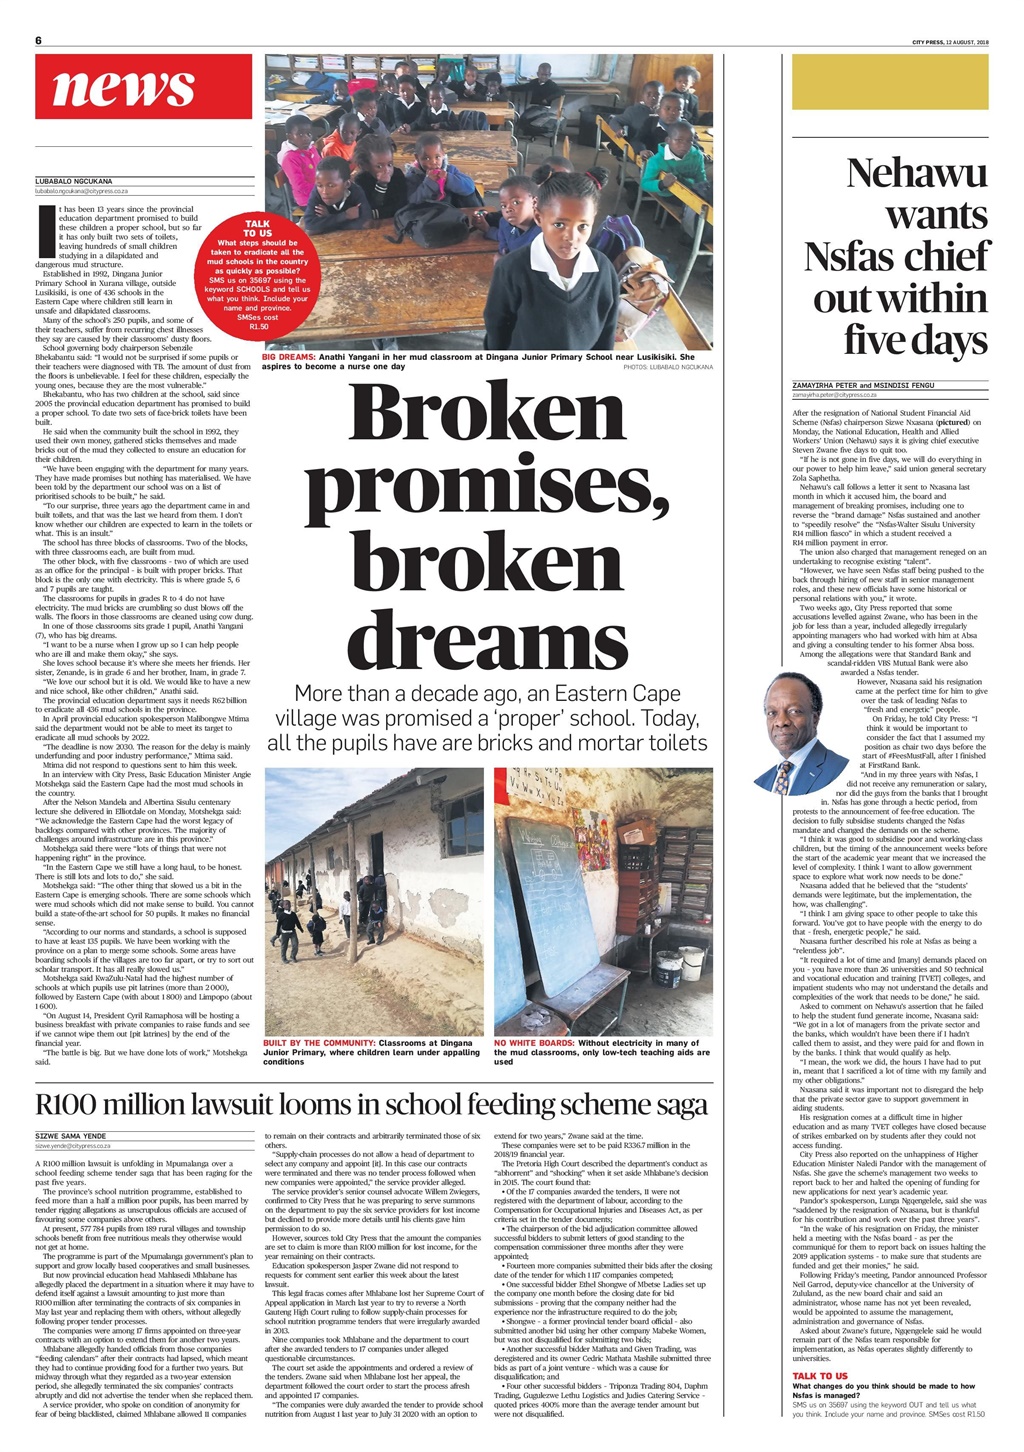 On August 12 2018 City Press told the story of 7-year-old Anathi Yangani and her fellow pupils at the Dingana Junior Primary School near Lusikisiki.